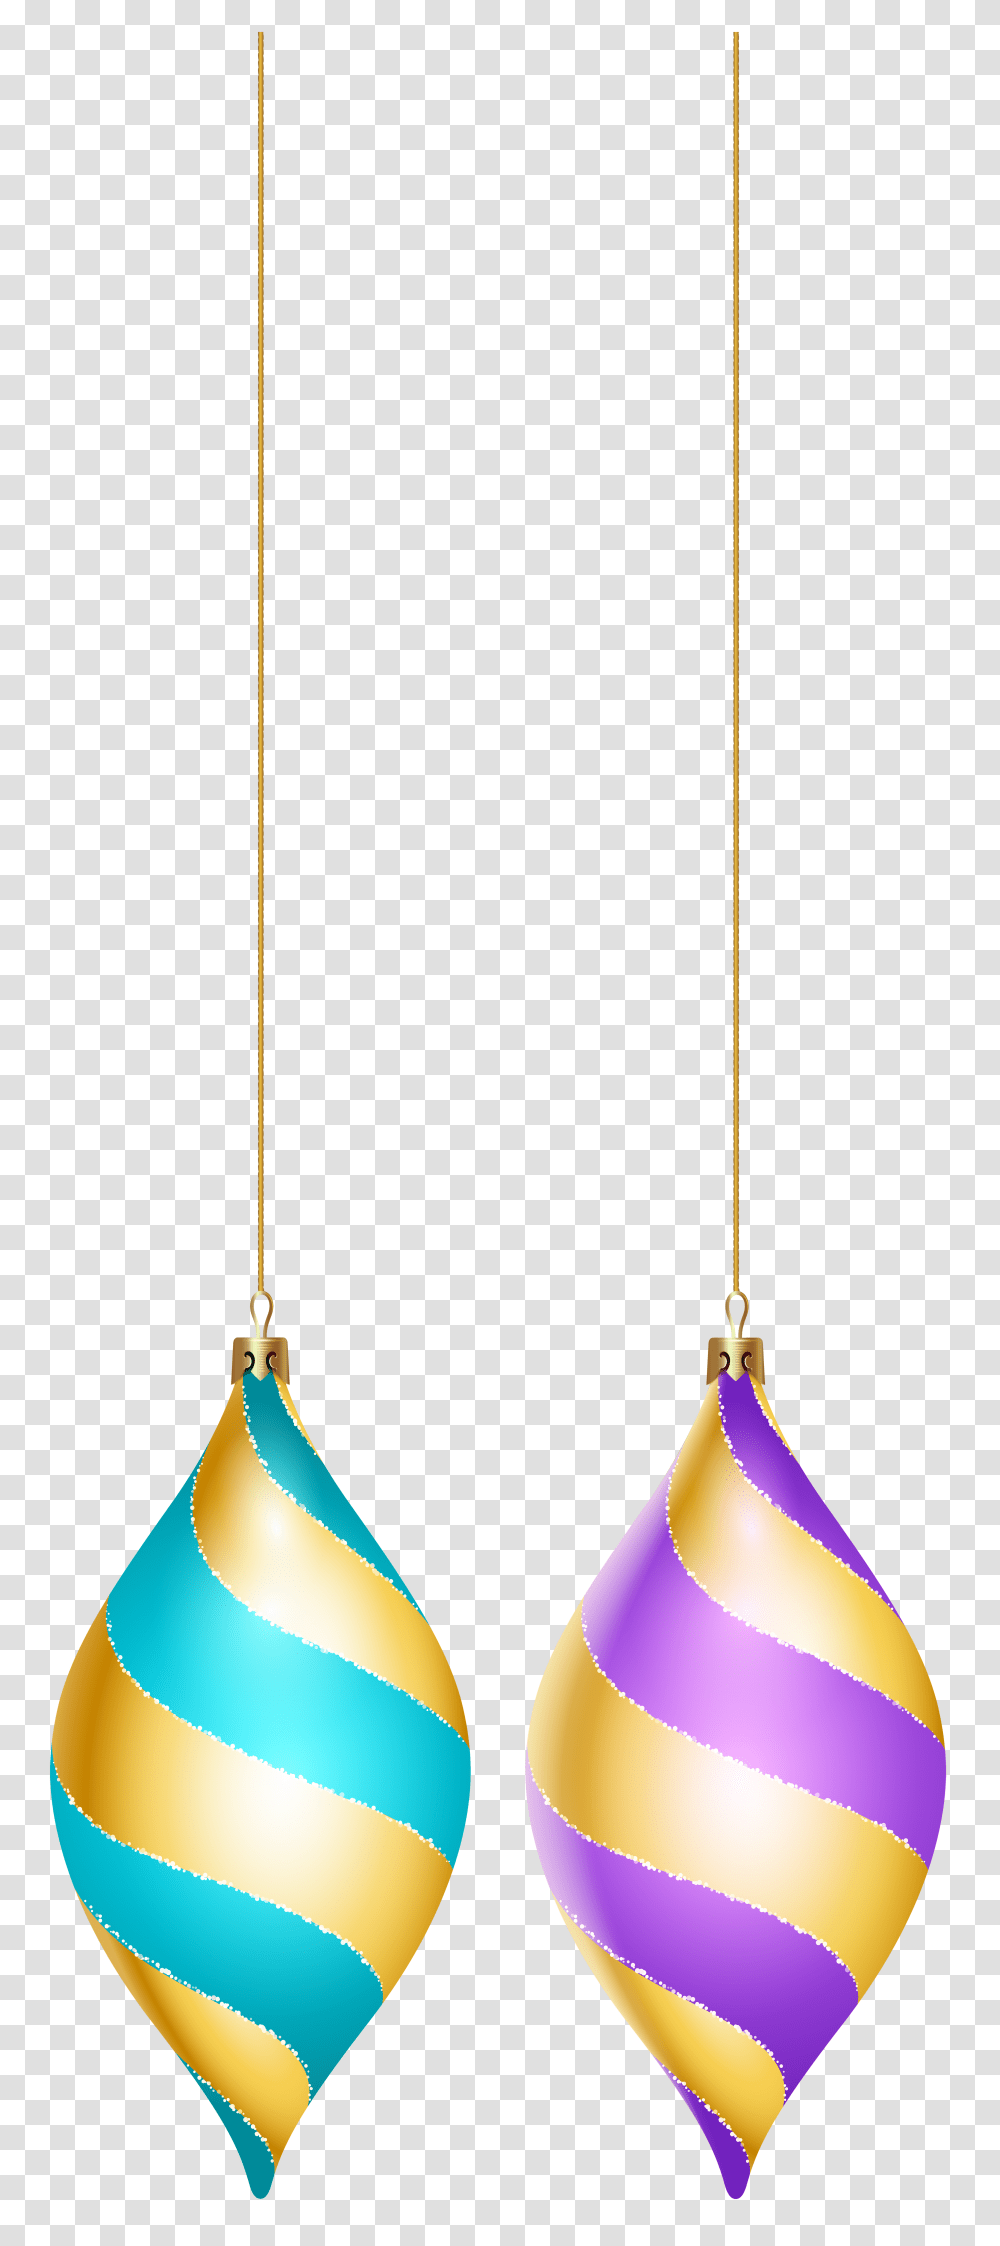 Christmas Tree Ornaments Clip Art Gallery, Gold, Trophy, Gold Medal Transparent Png